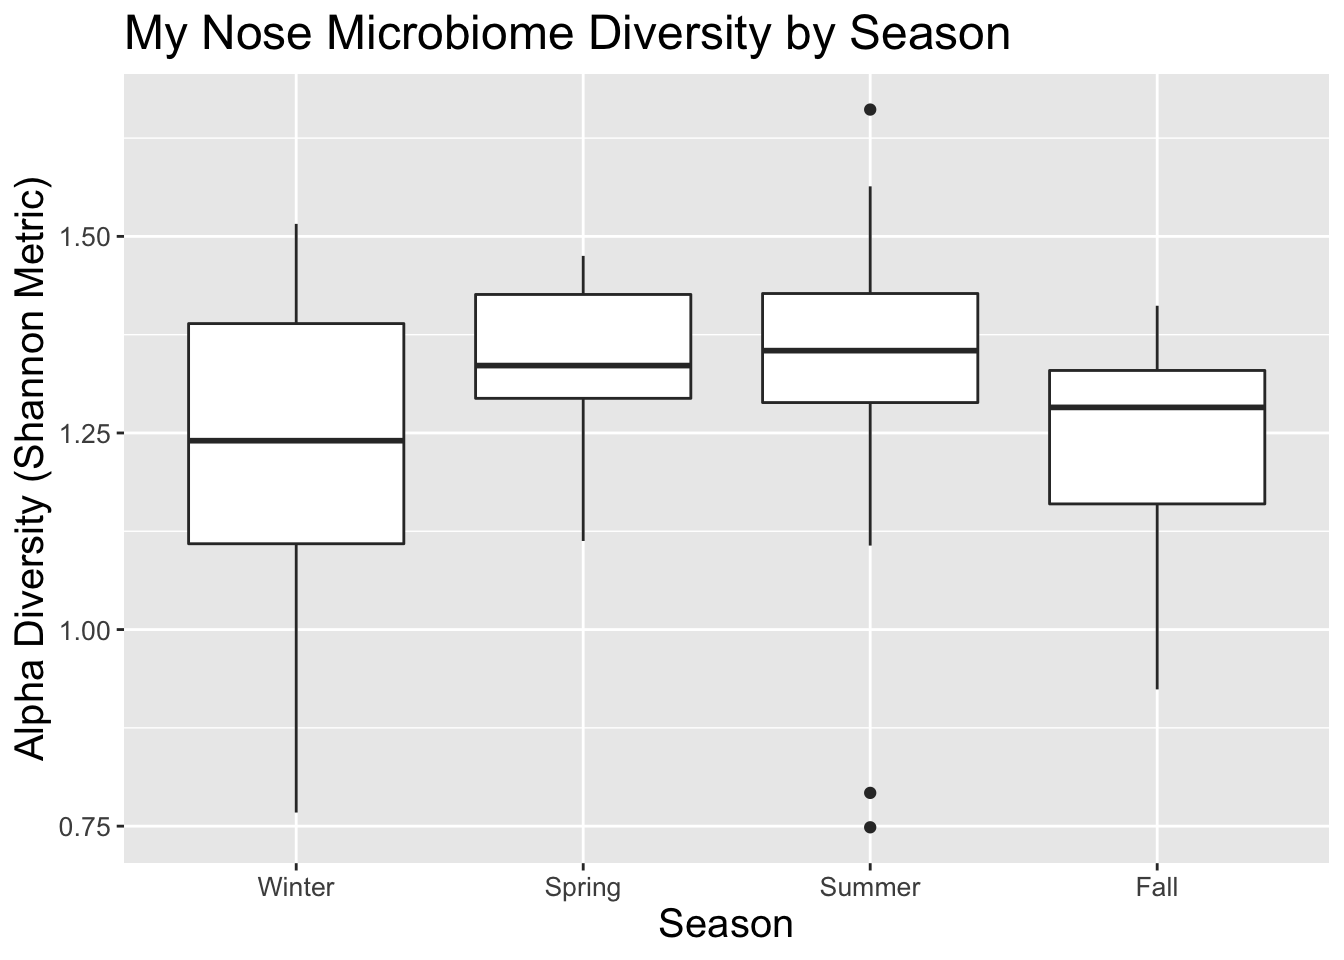 Nose microbiome diversity in a single geography by season.